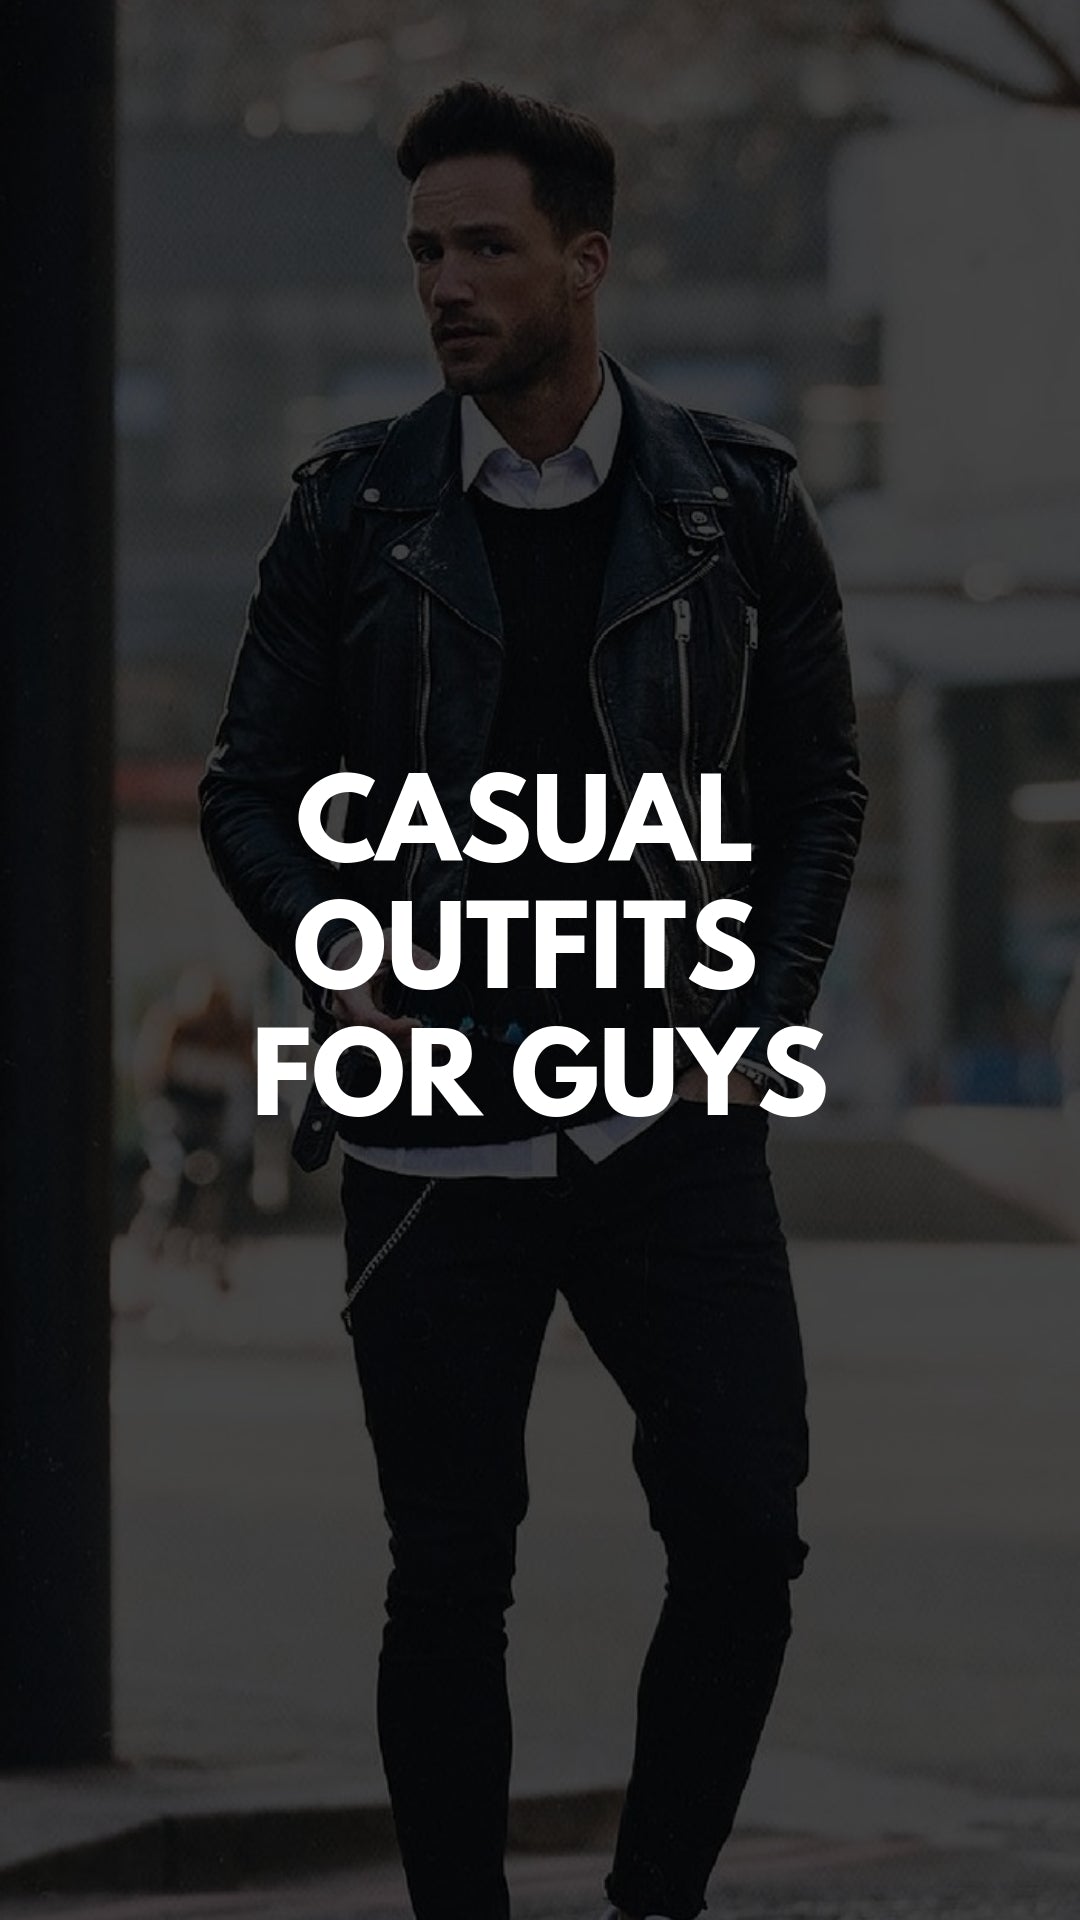 5 CASUAL OUTFITS THAT AREN'T BORING